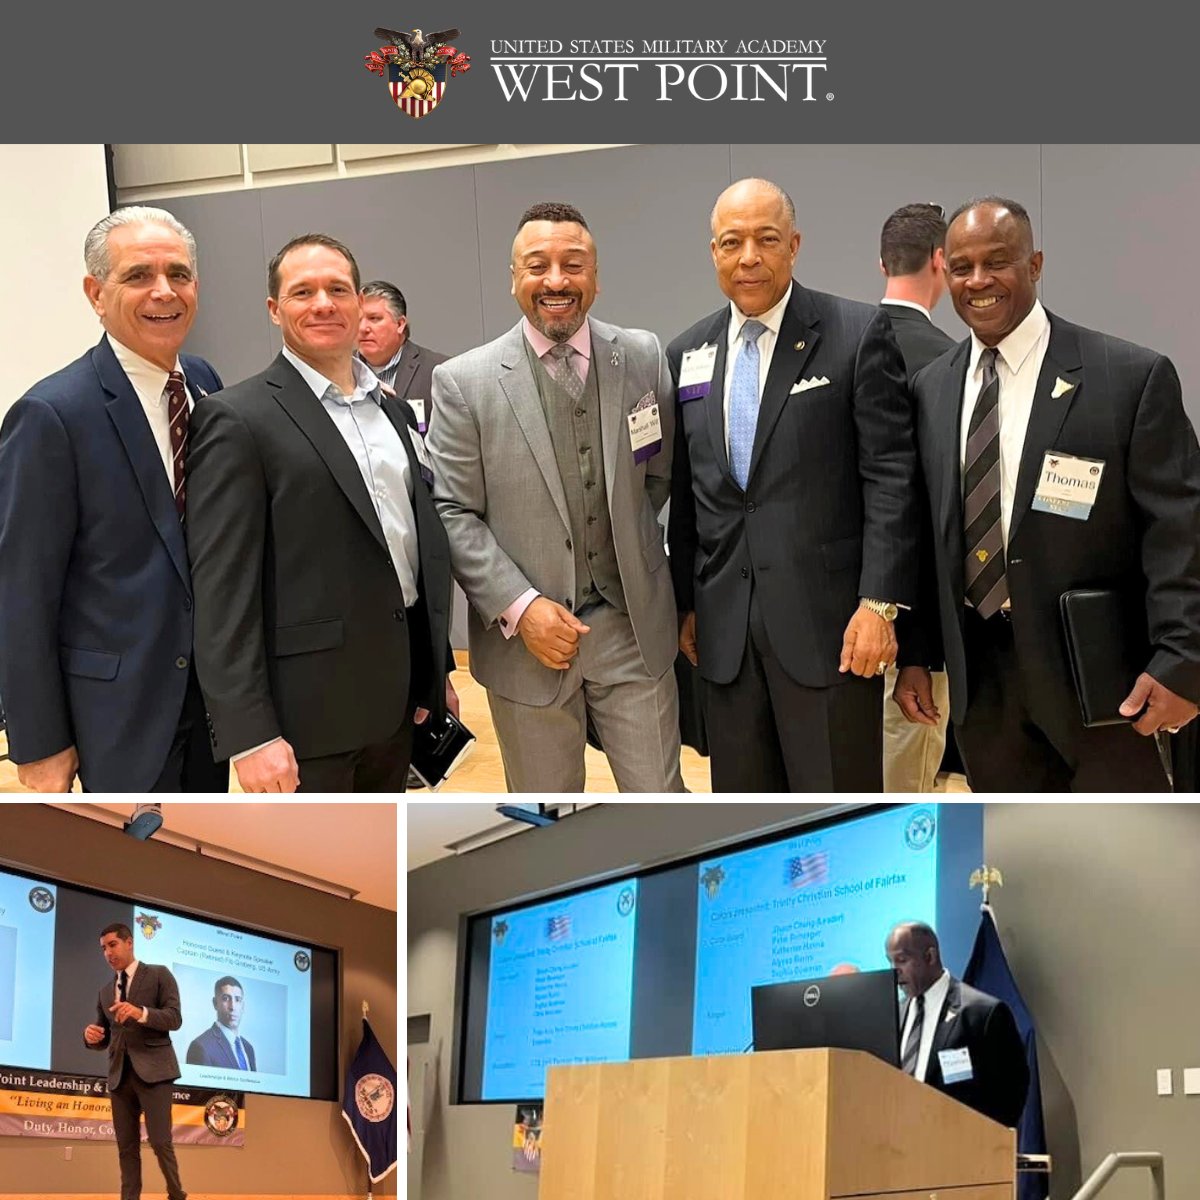 We were honored to sponsor and participate in @WestPoint_USMA's 17th Annual Leadership and Ethics Conference at George Mason University last week that brought together over 200 high school students from Northern VA and Washington DC to support the #nextgeneration of #leaders.